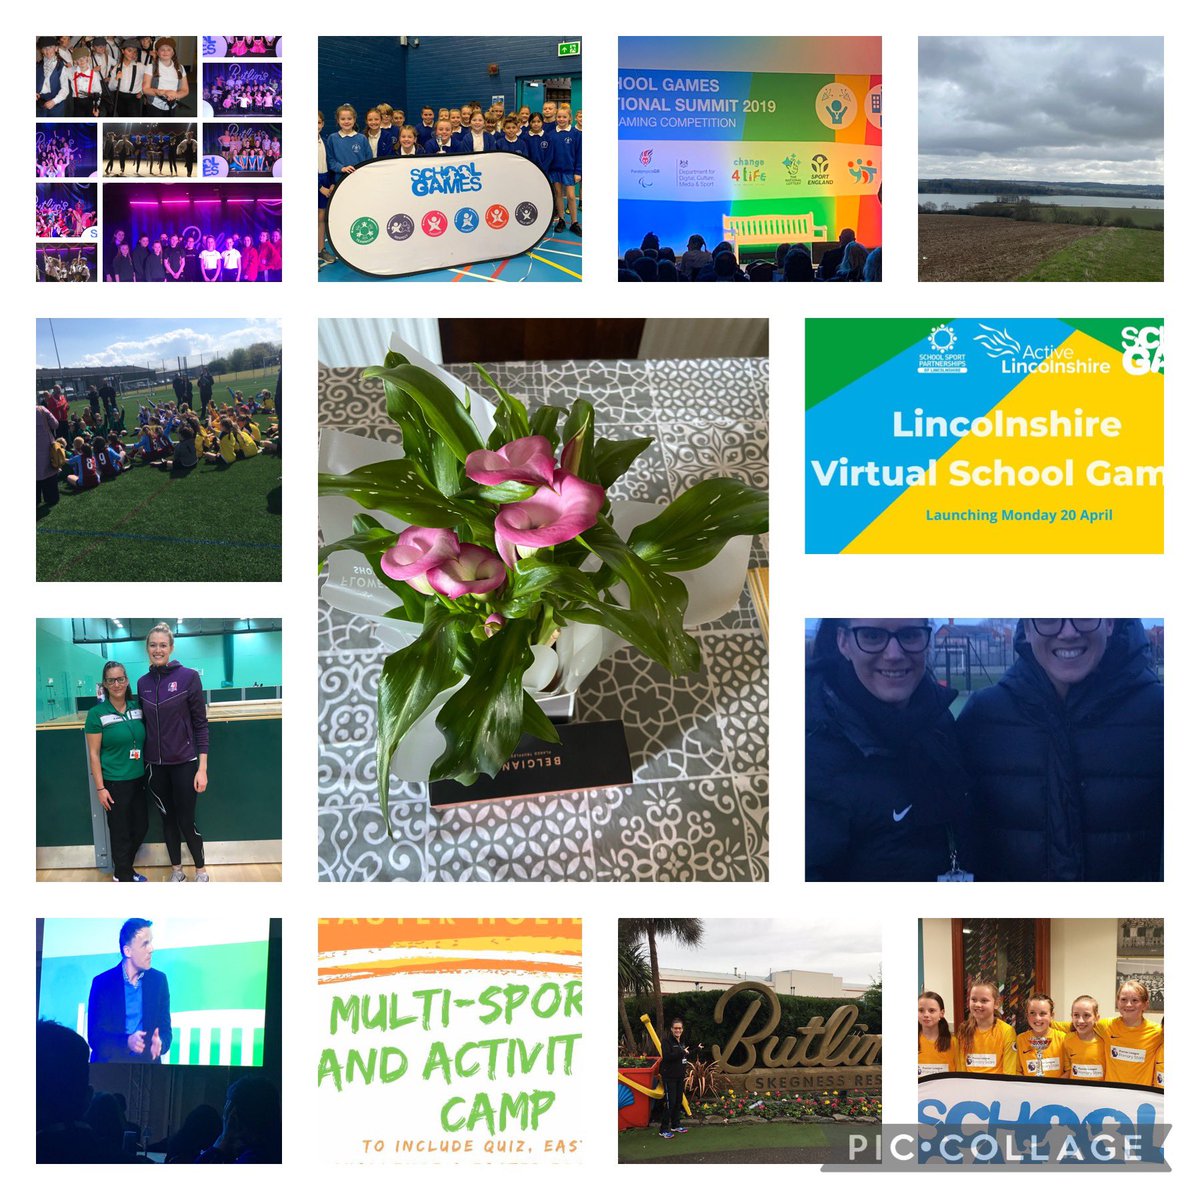 A wonderful 4 years as an SEO and SGO. Experiences and memories I will treasure alongside the most committed and dedicated colleagues and individuals. Thank you for giving me such a wonderful stepping stone into my future career. 💚@SWardDRETPYP @AlicePageDRET @DRETsport